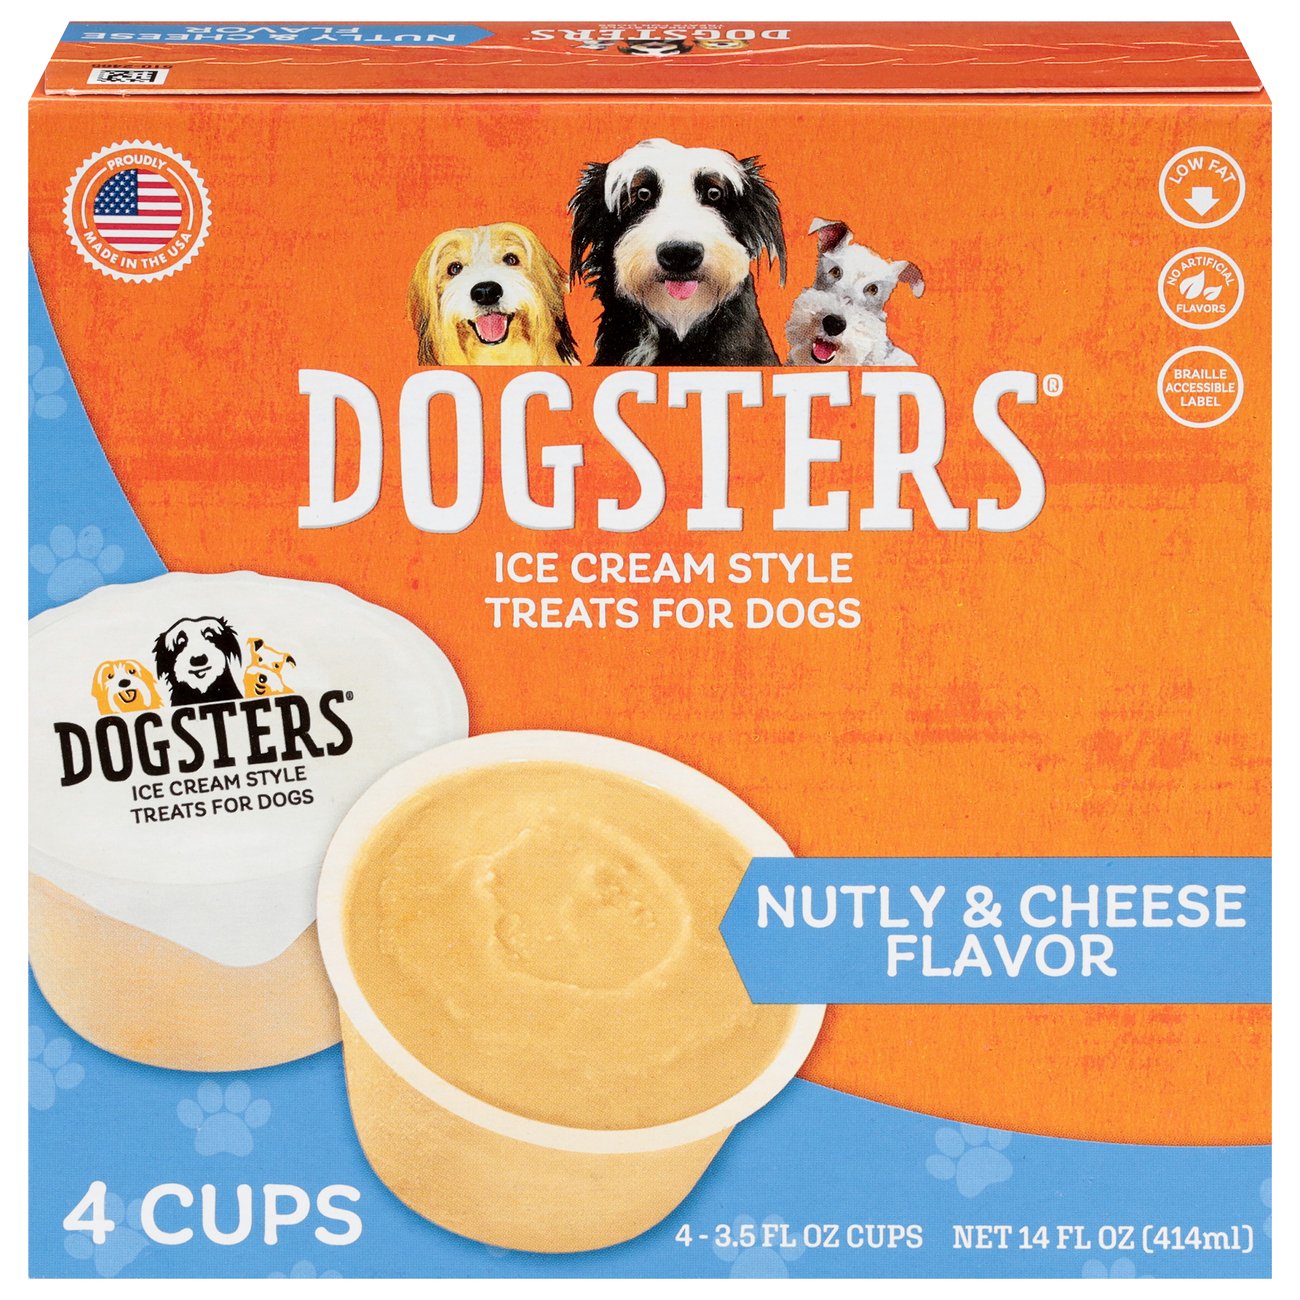 Dogsters Nutly Peanut Butter Cheese 